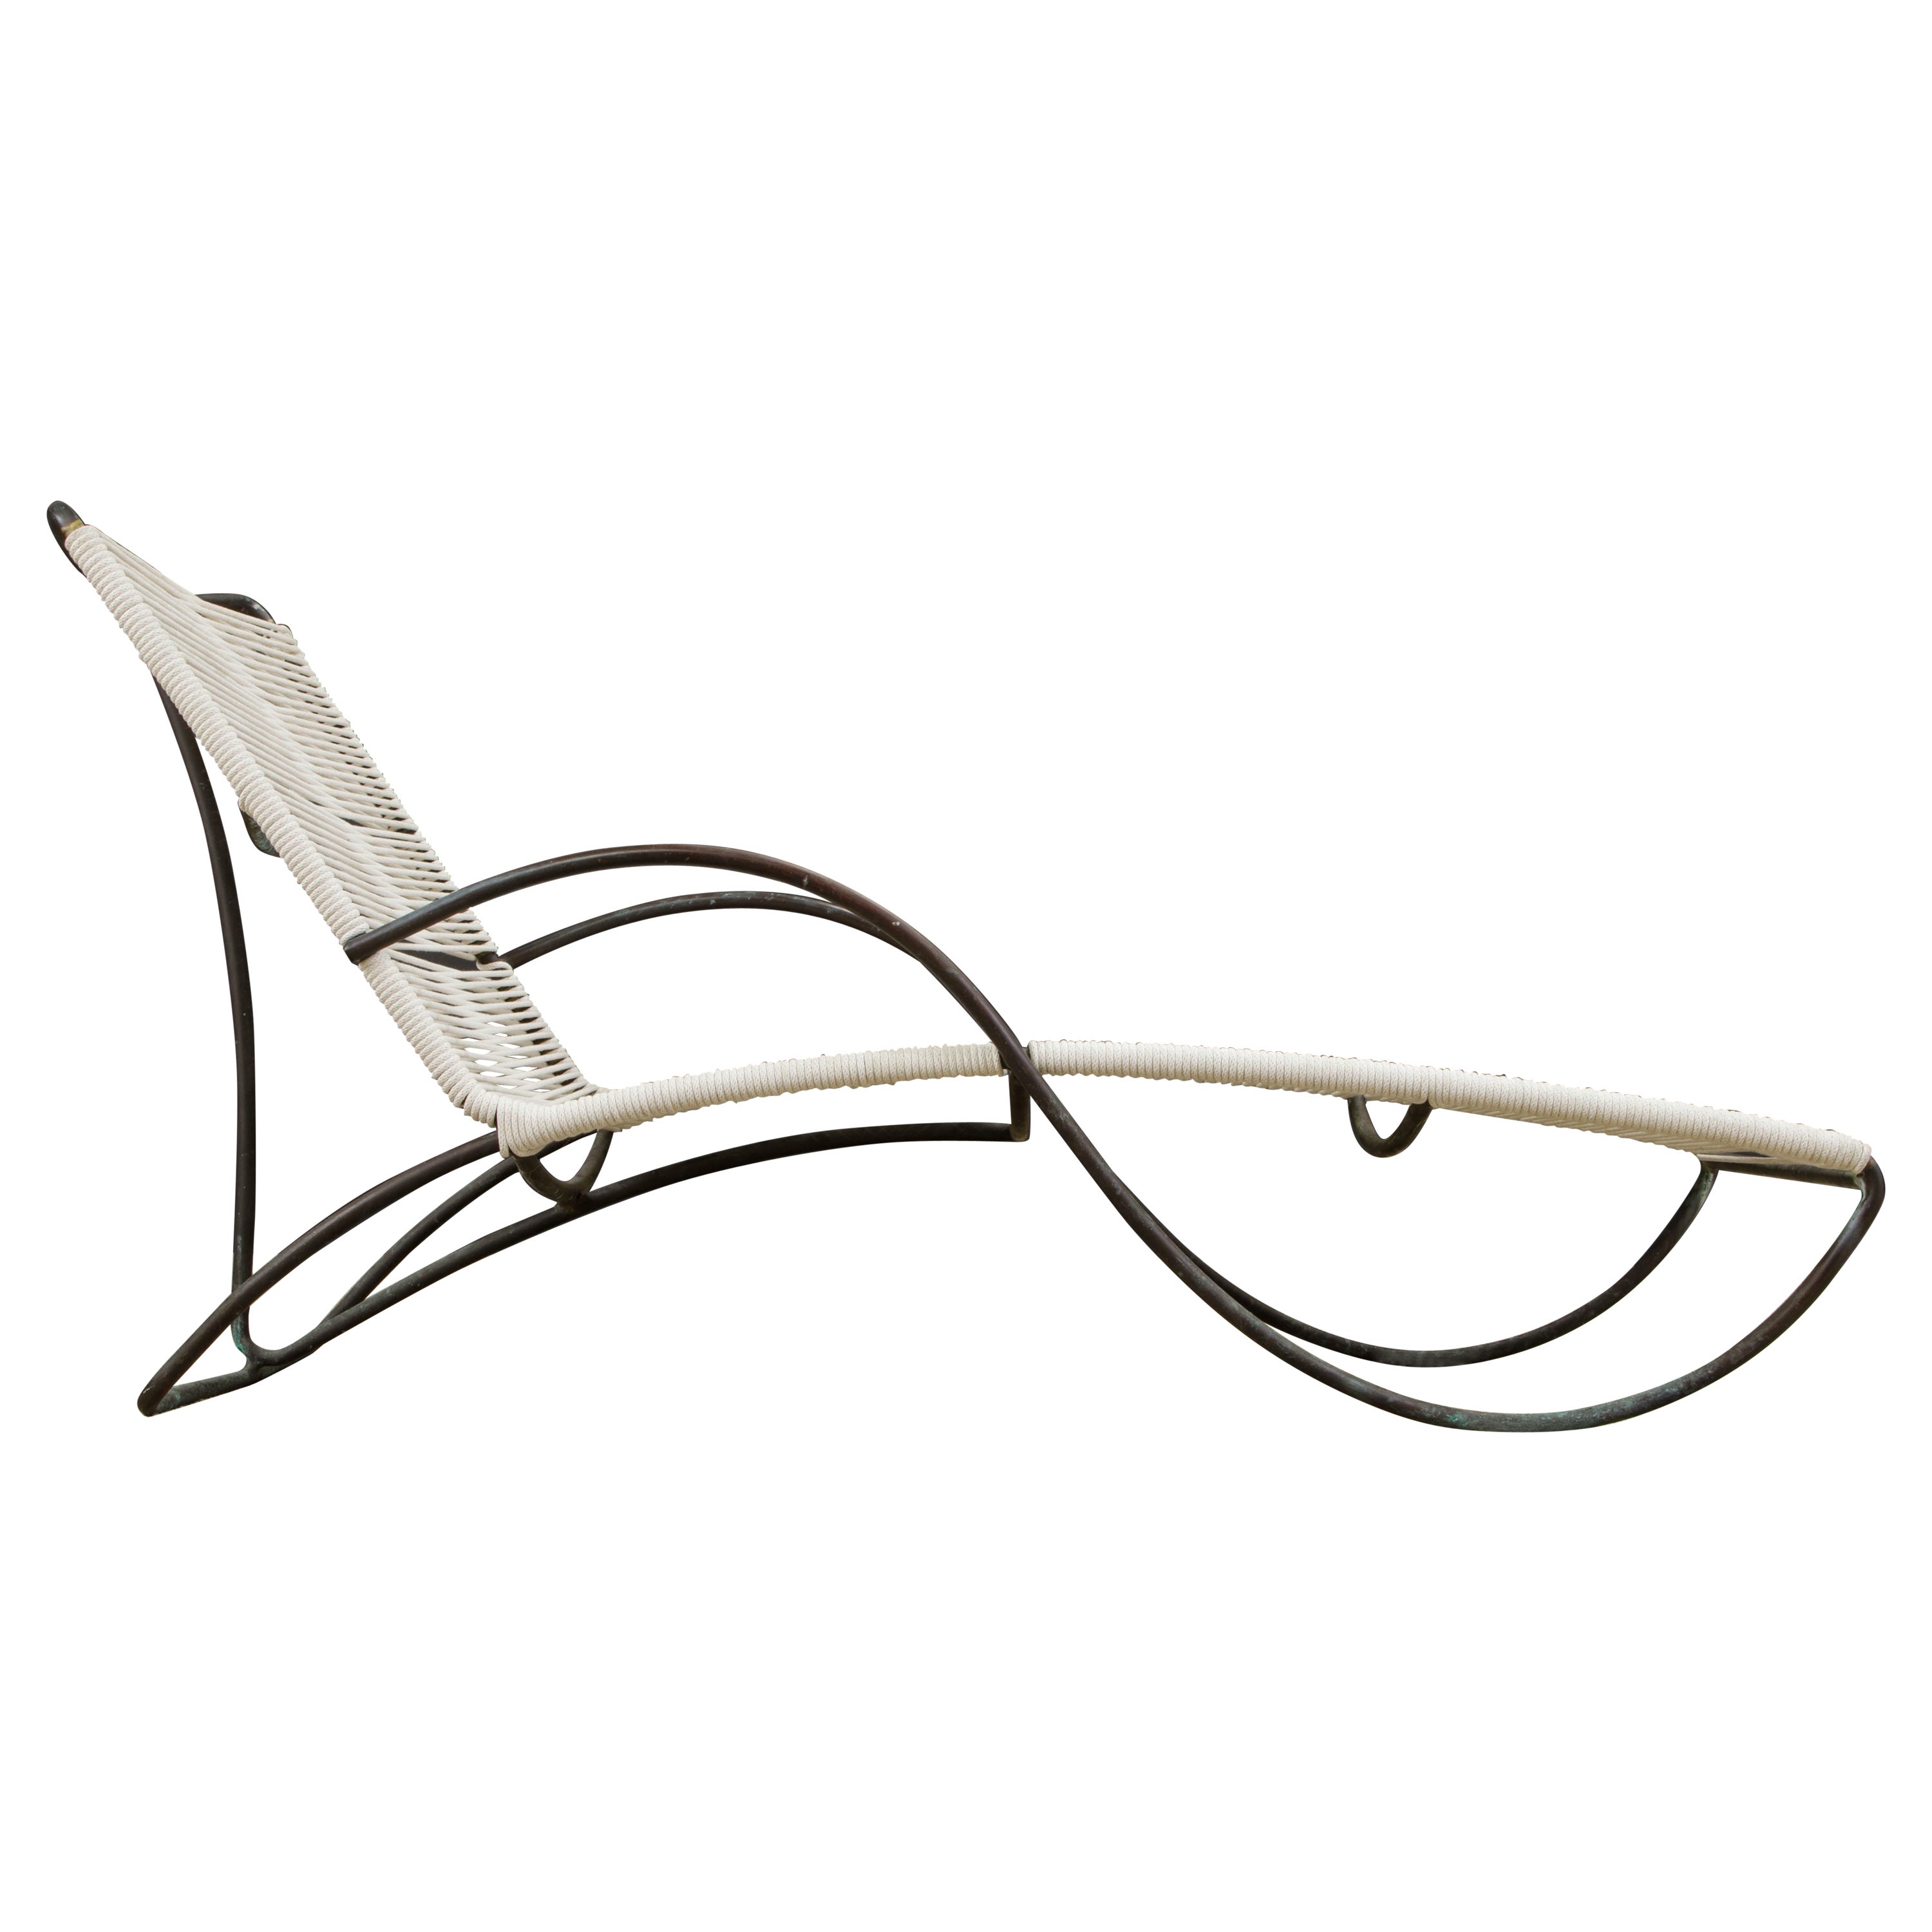 Bronze 'S Chaise' by Walter Lamb for Brown Jordan, c 1970s, Signed For Sale